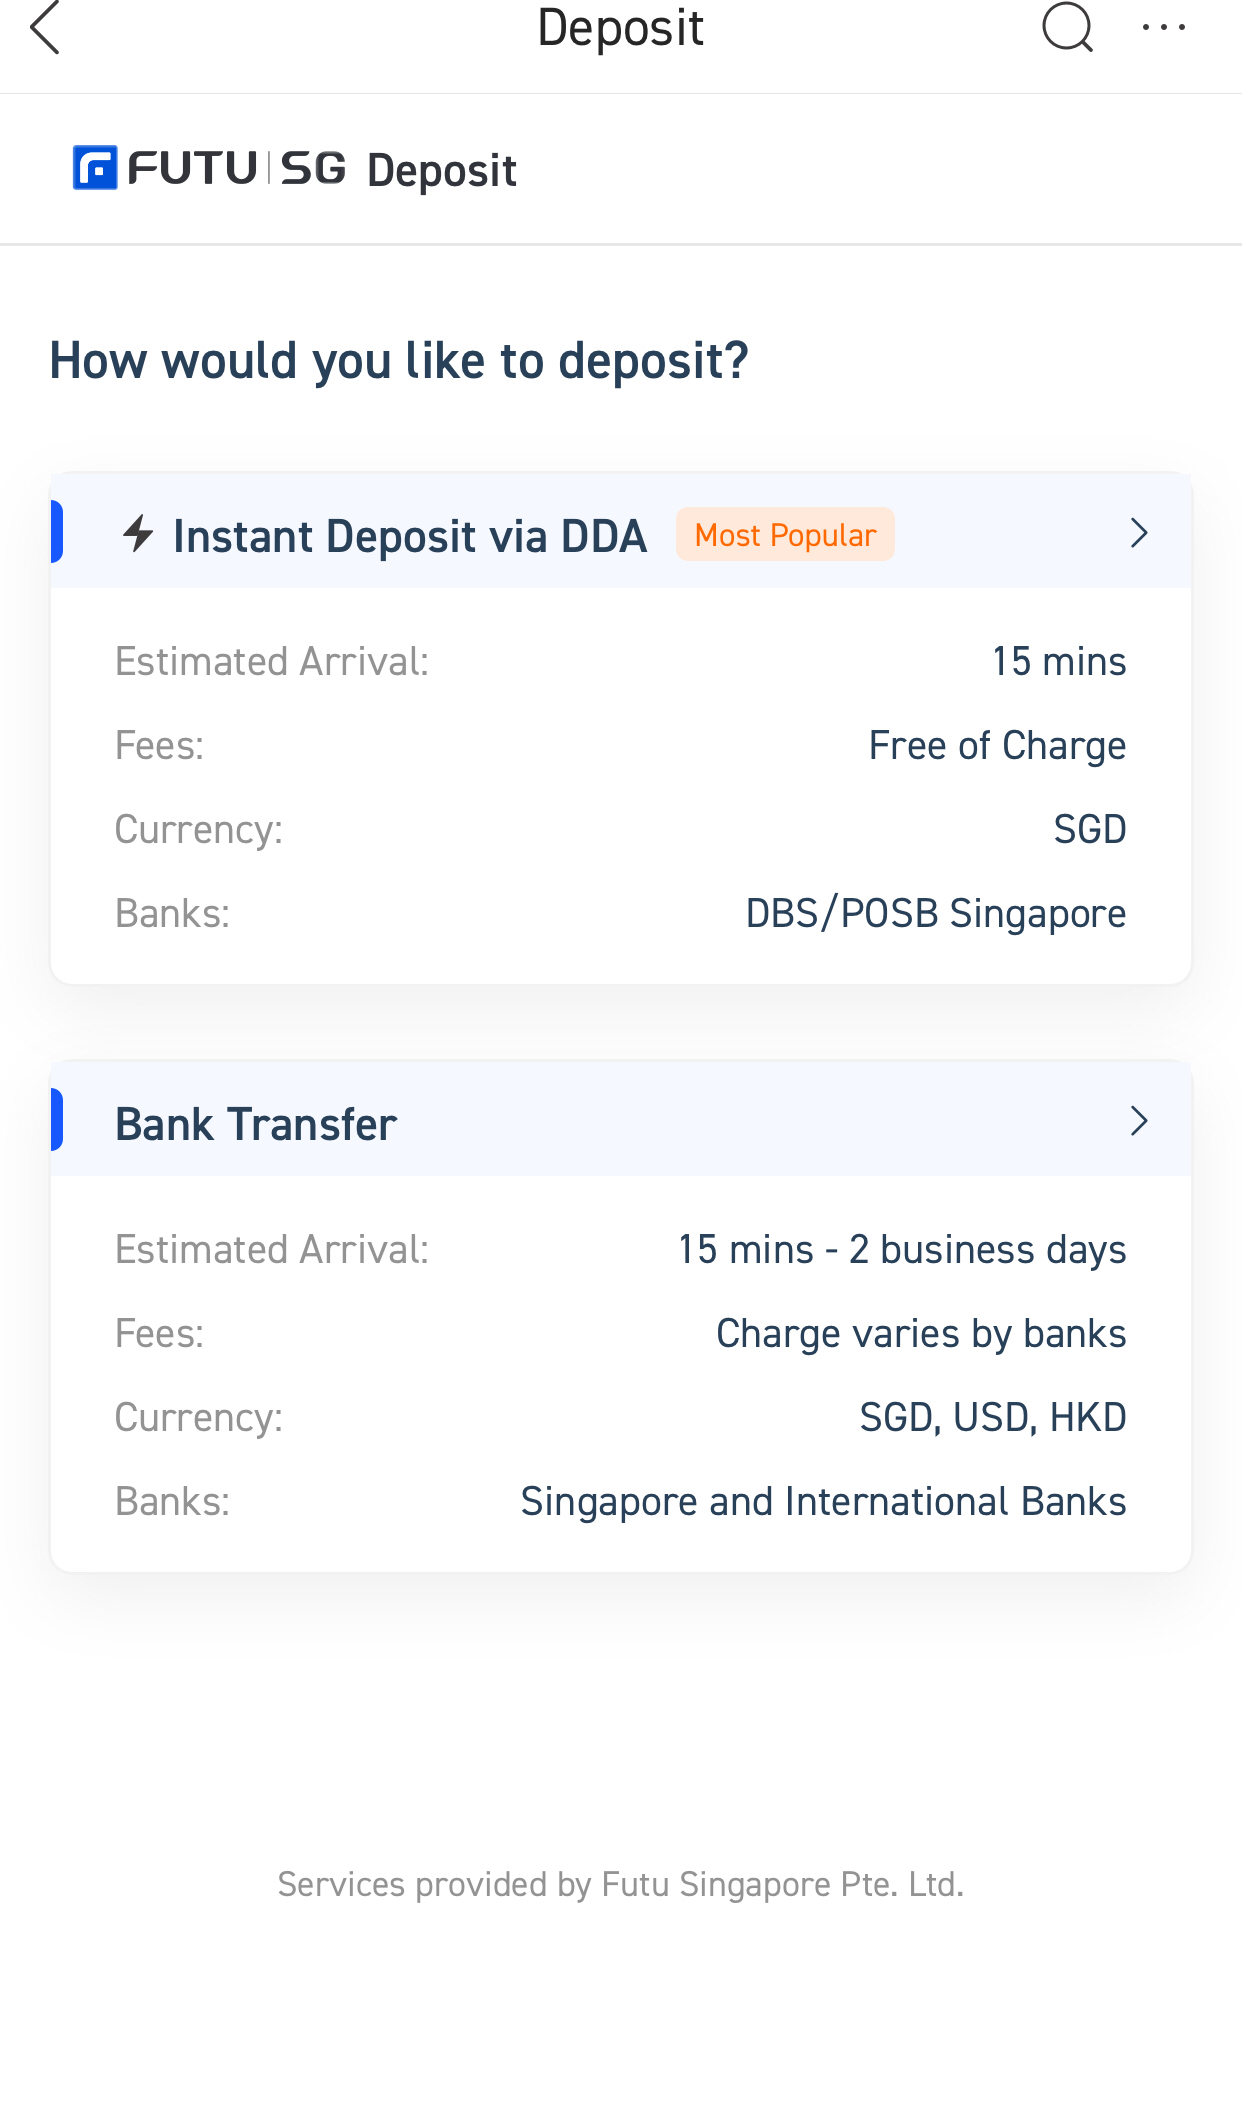 FAQ（for Futu SG clients): Can I deposit money using non-DBS? What are the fees?